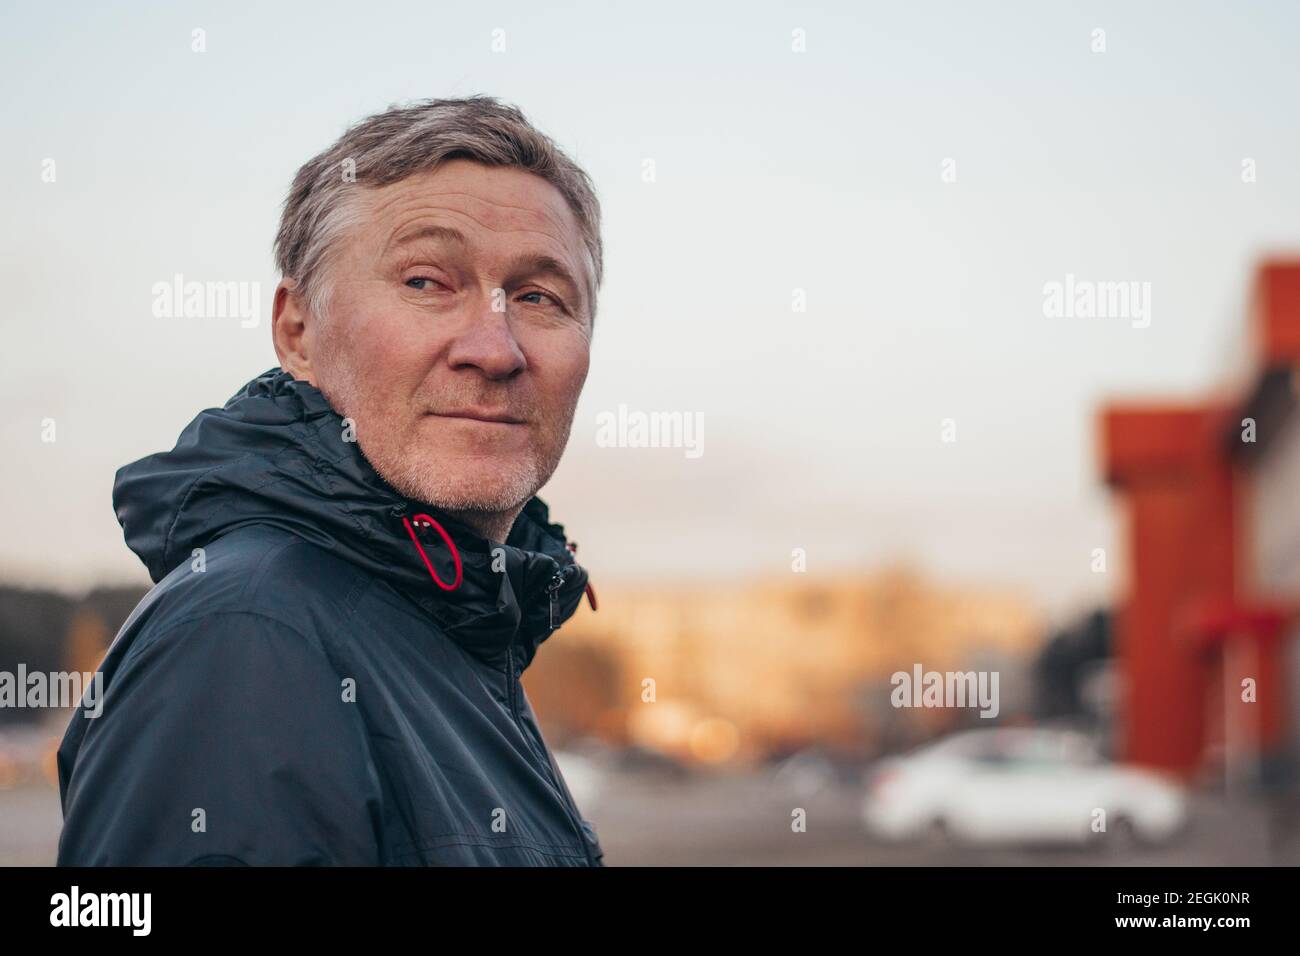 Portrait of a handsome middle-aged man. Adult man in a jacket outdoors in the city. Blurred background. Copy space. Stock Photo